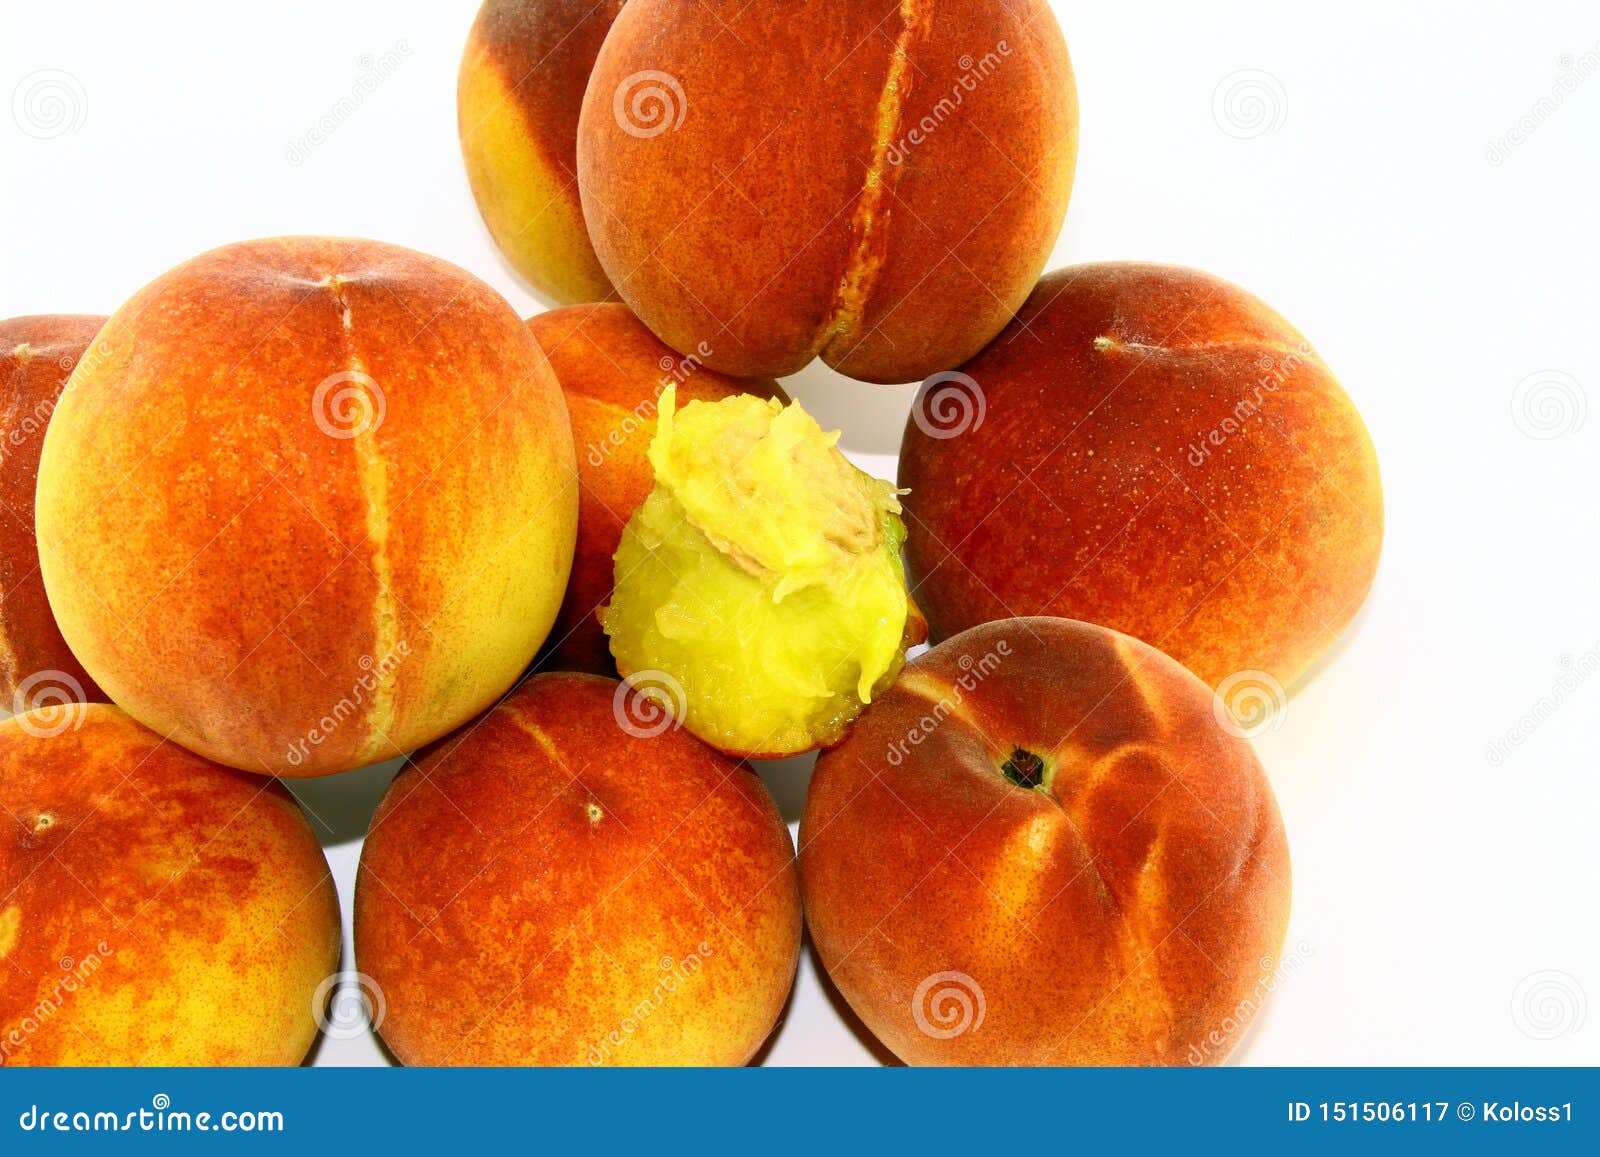 Pitted Peach on White Background Stock Image - Image of circle, healthy:  151506117